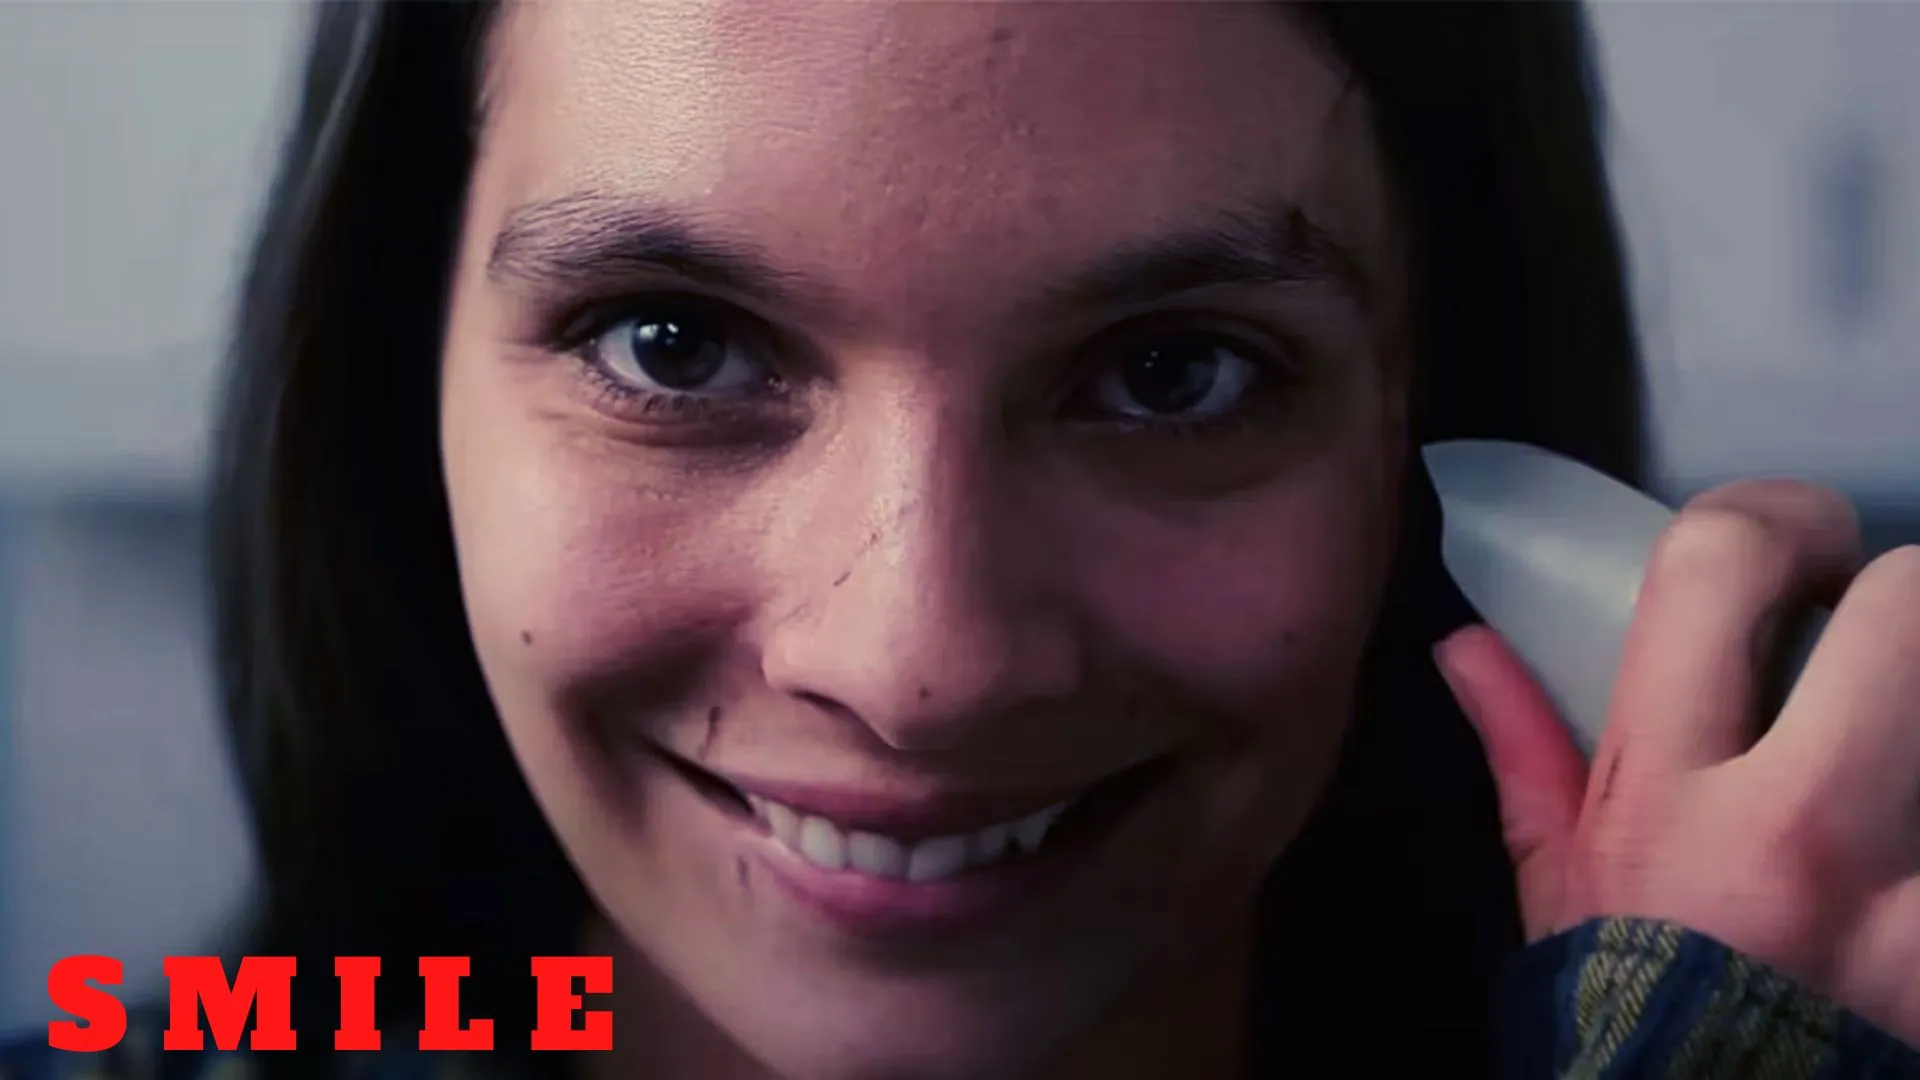 The Final Trailer for Paramount Pictures' 'Smile' Is Here With Ghastly Smile